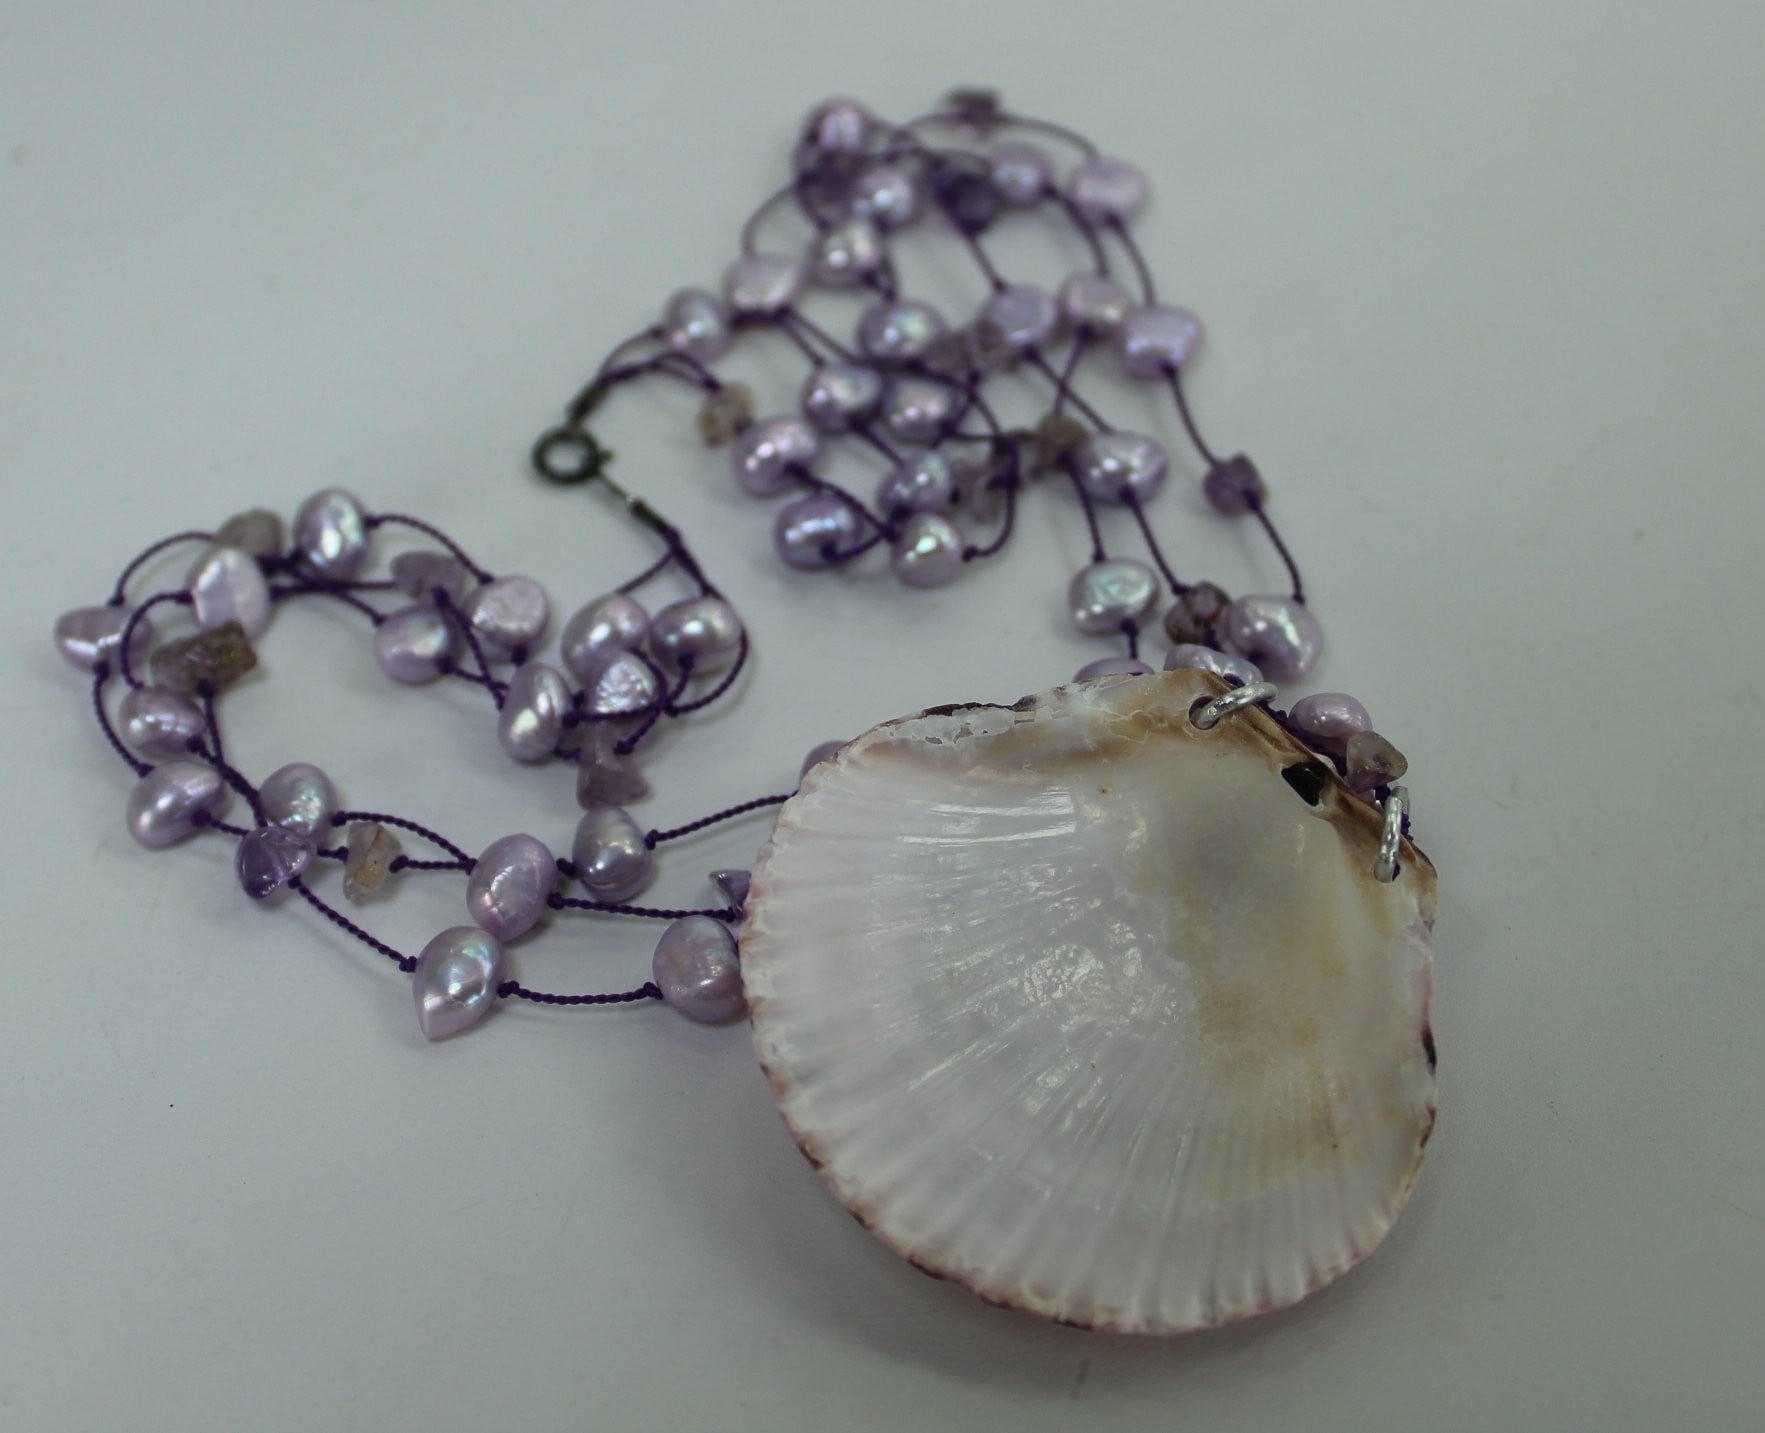 Shell Necklace Purple Scallop Barnacles Beads 17" Organic Natural sustainable